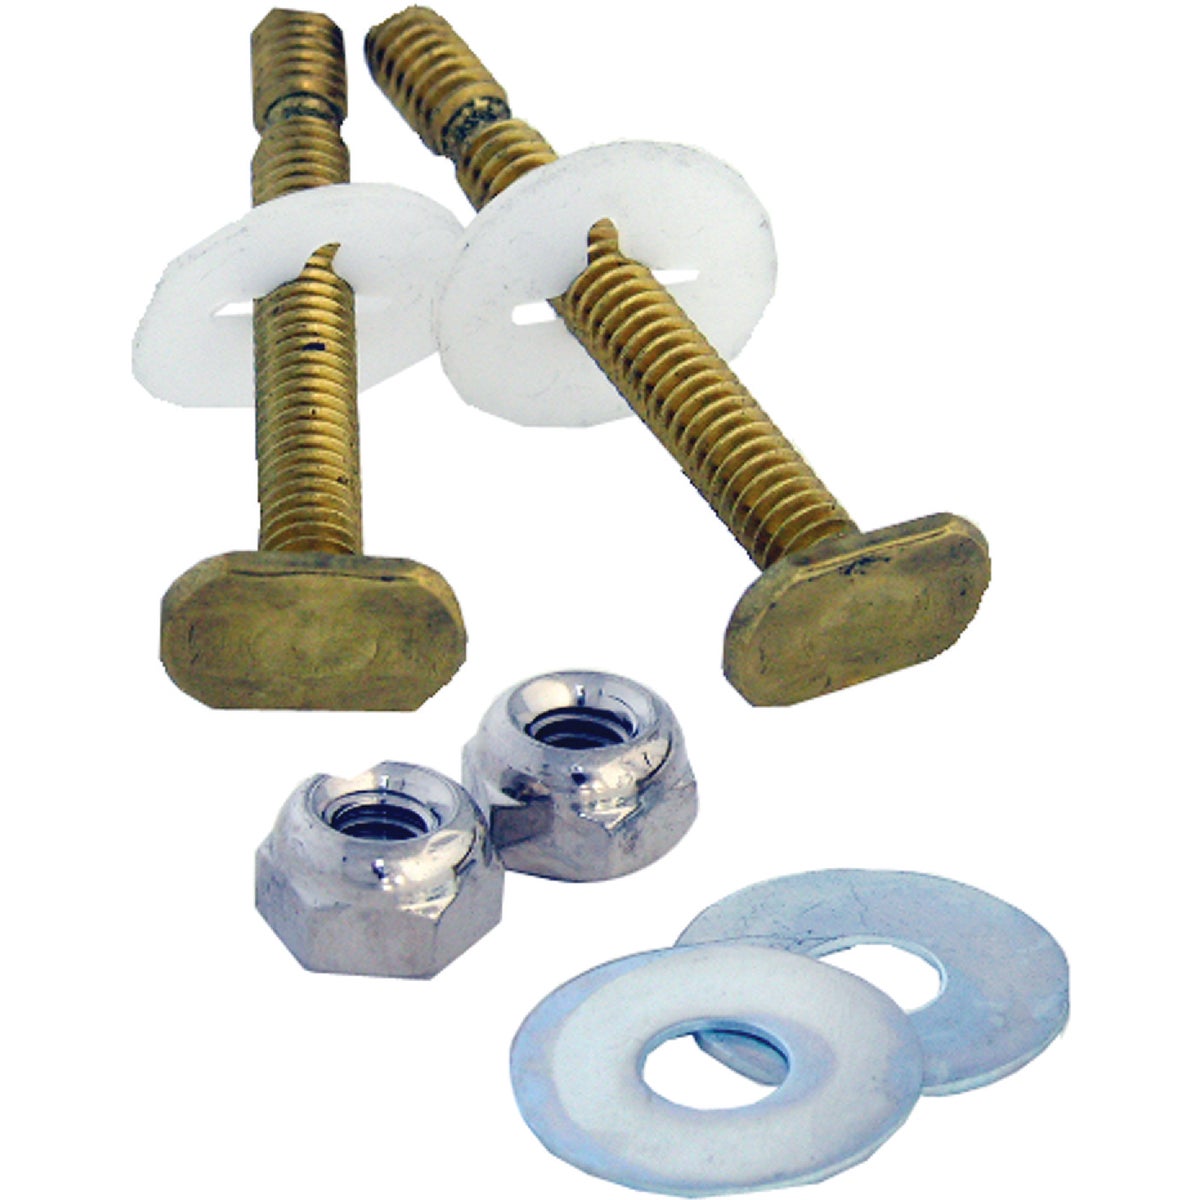 Lasco 1/4 In. x 2-1/4 In. Solid Brass Toilet Bolts (2 Pack)